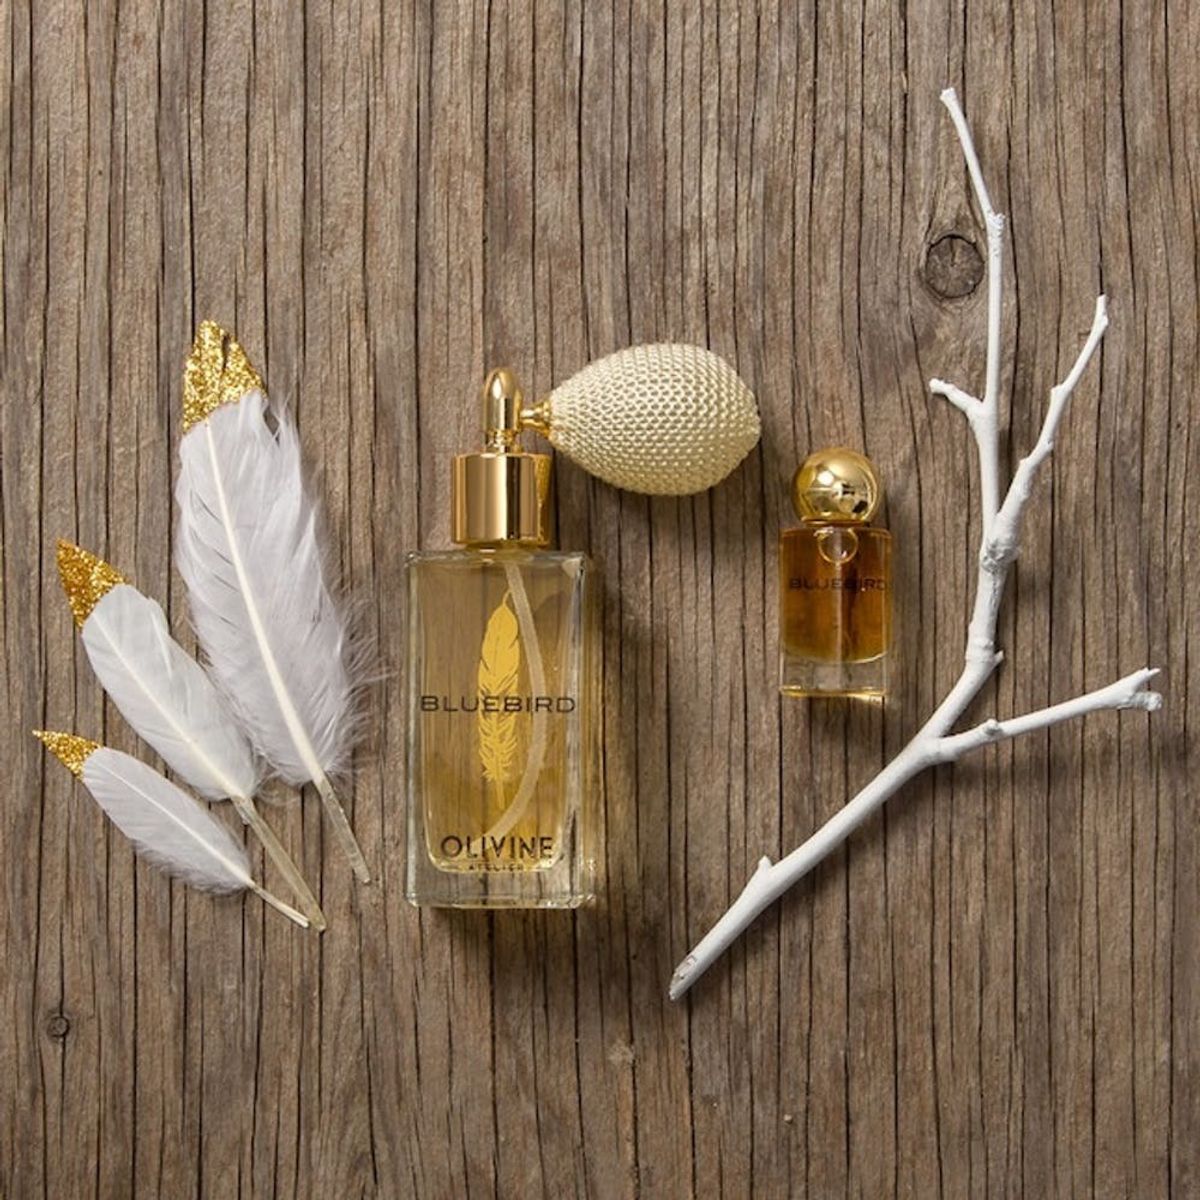 17 All-Natural Perfumes to Spice Up the Fall Season